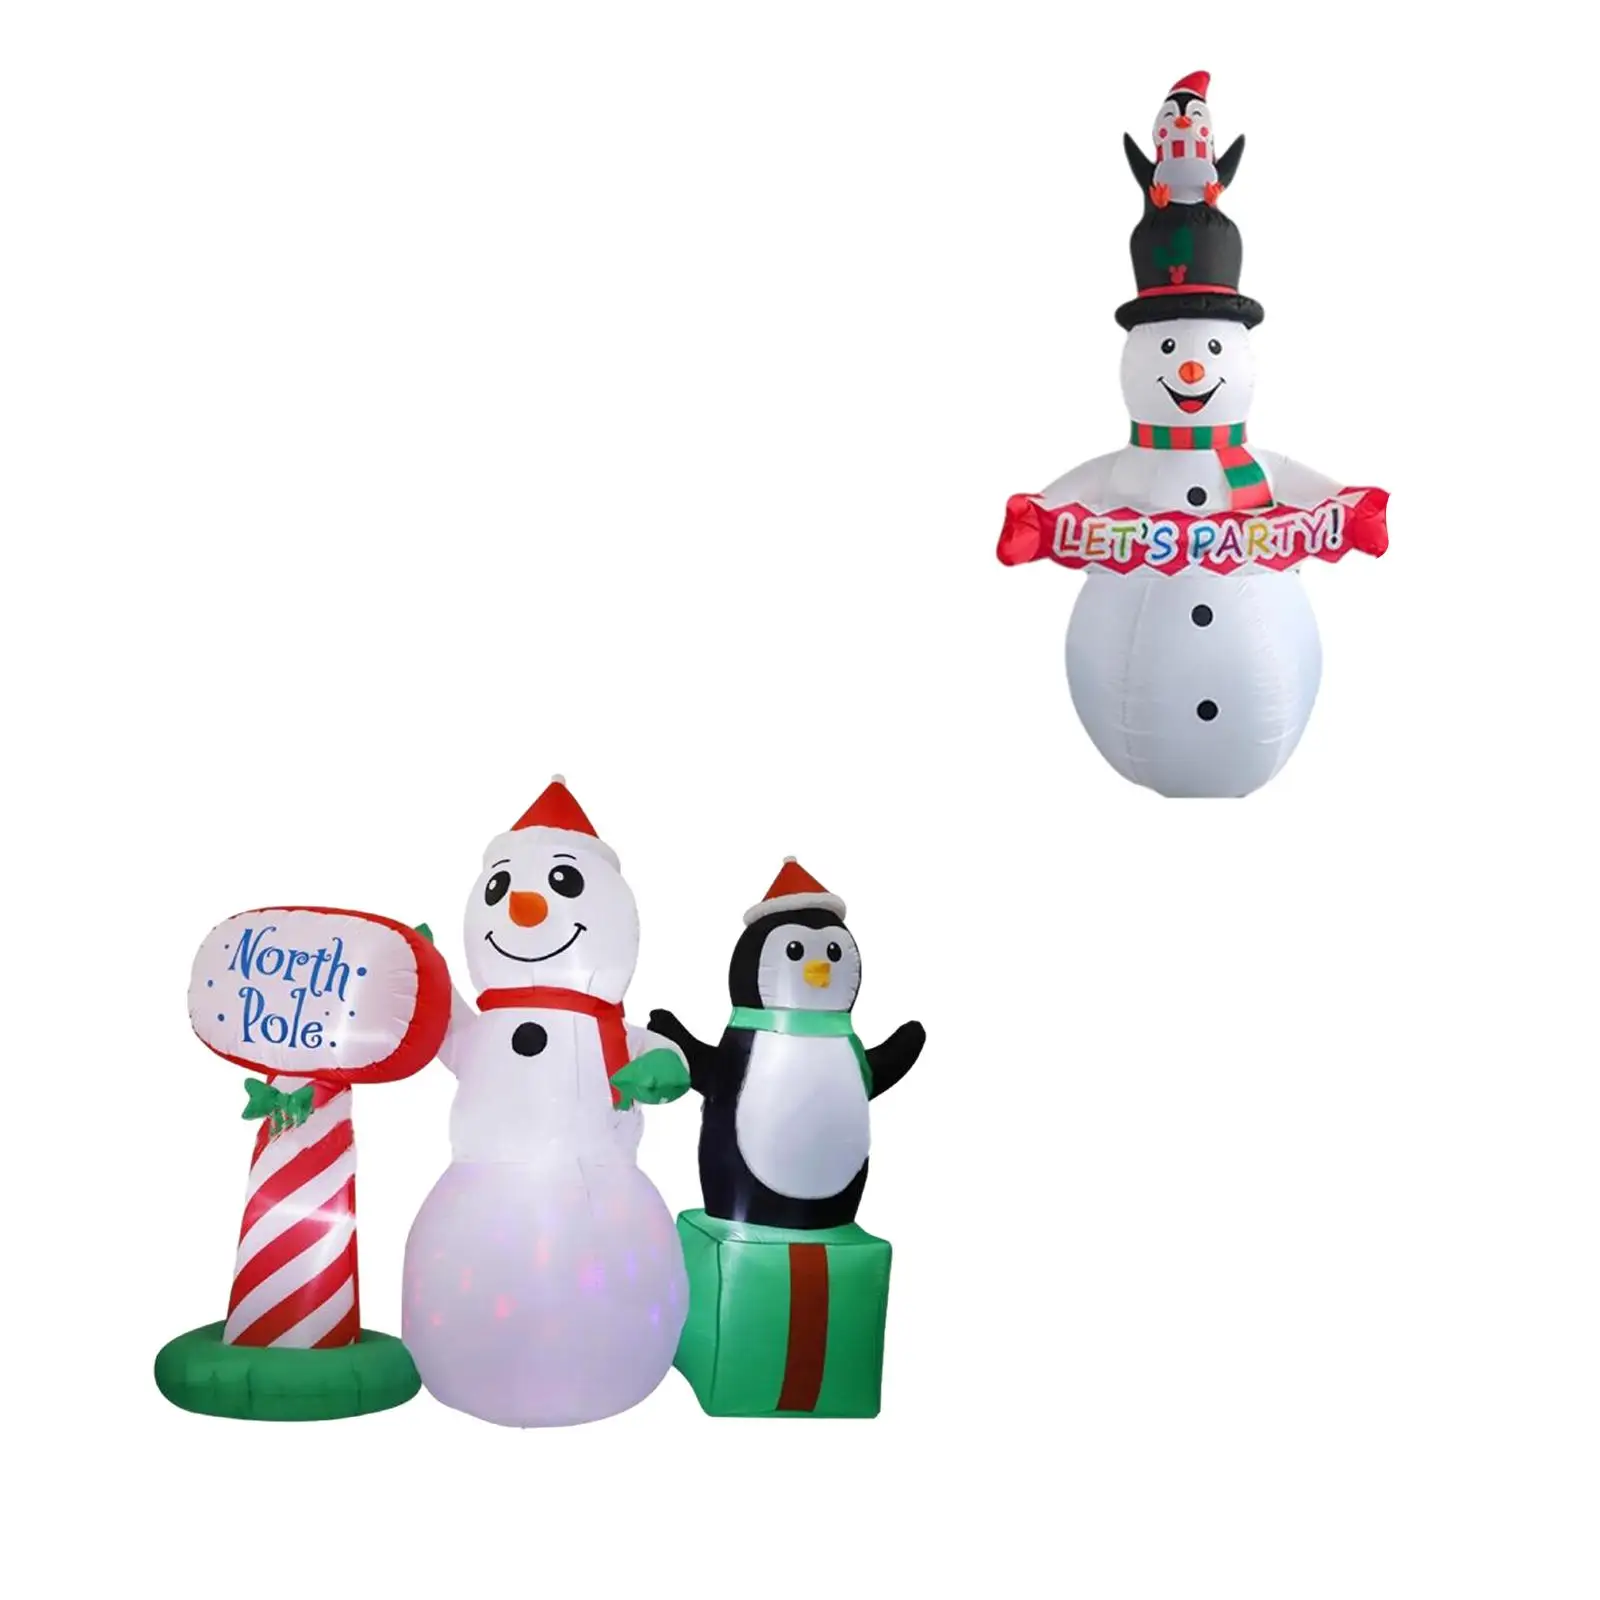 Inflatable Snowman Weatherproof Christmas Decoration for Garden Holiday Yard